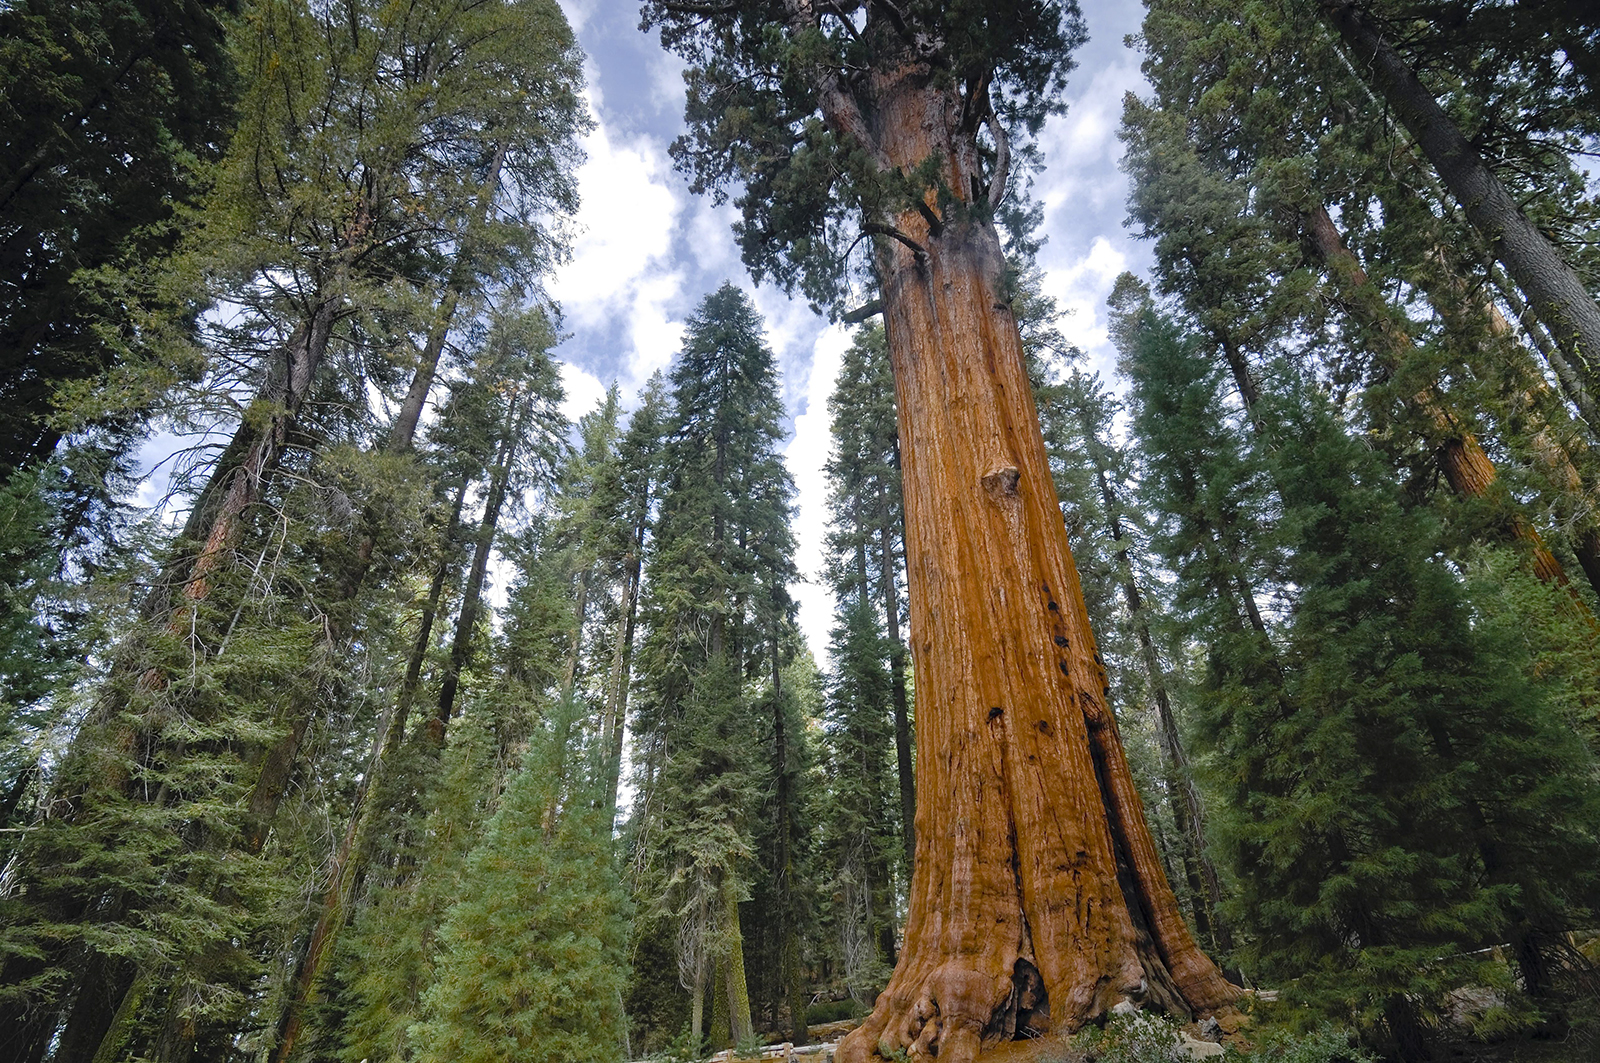 Top 10 Biggest Trees in the World